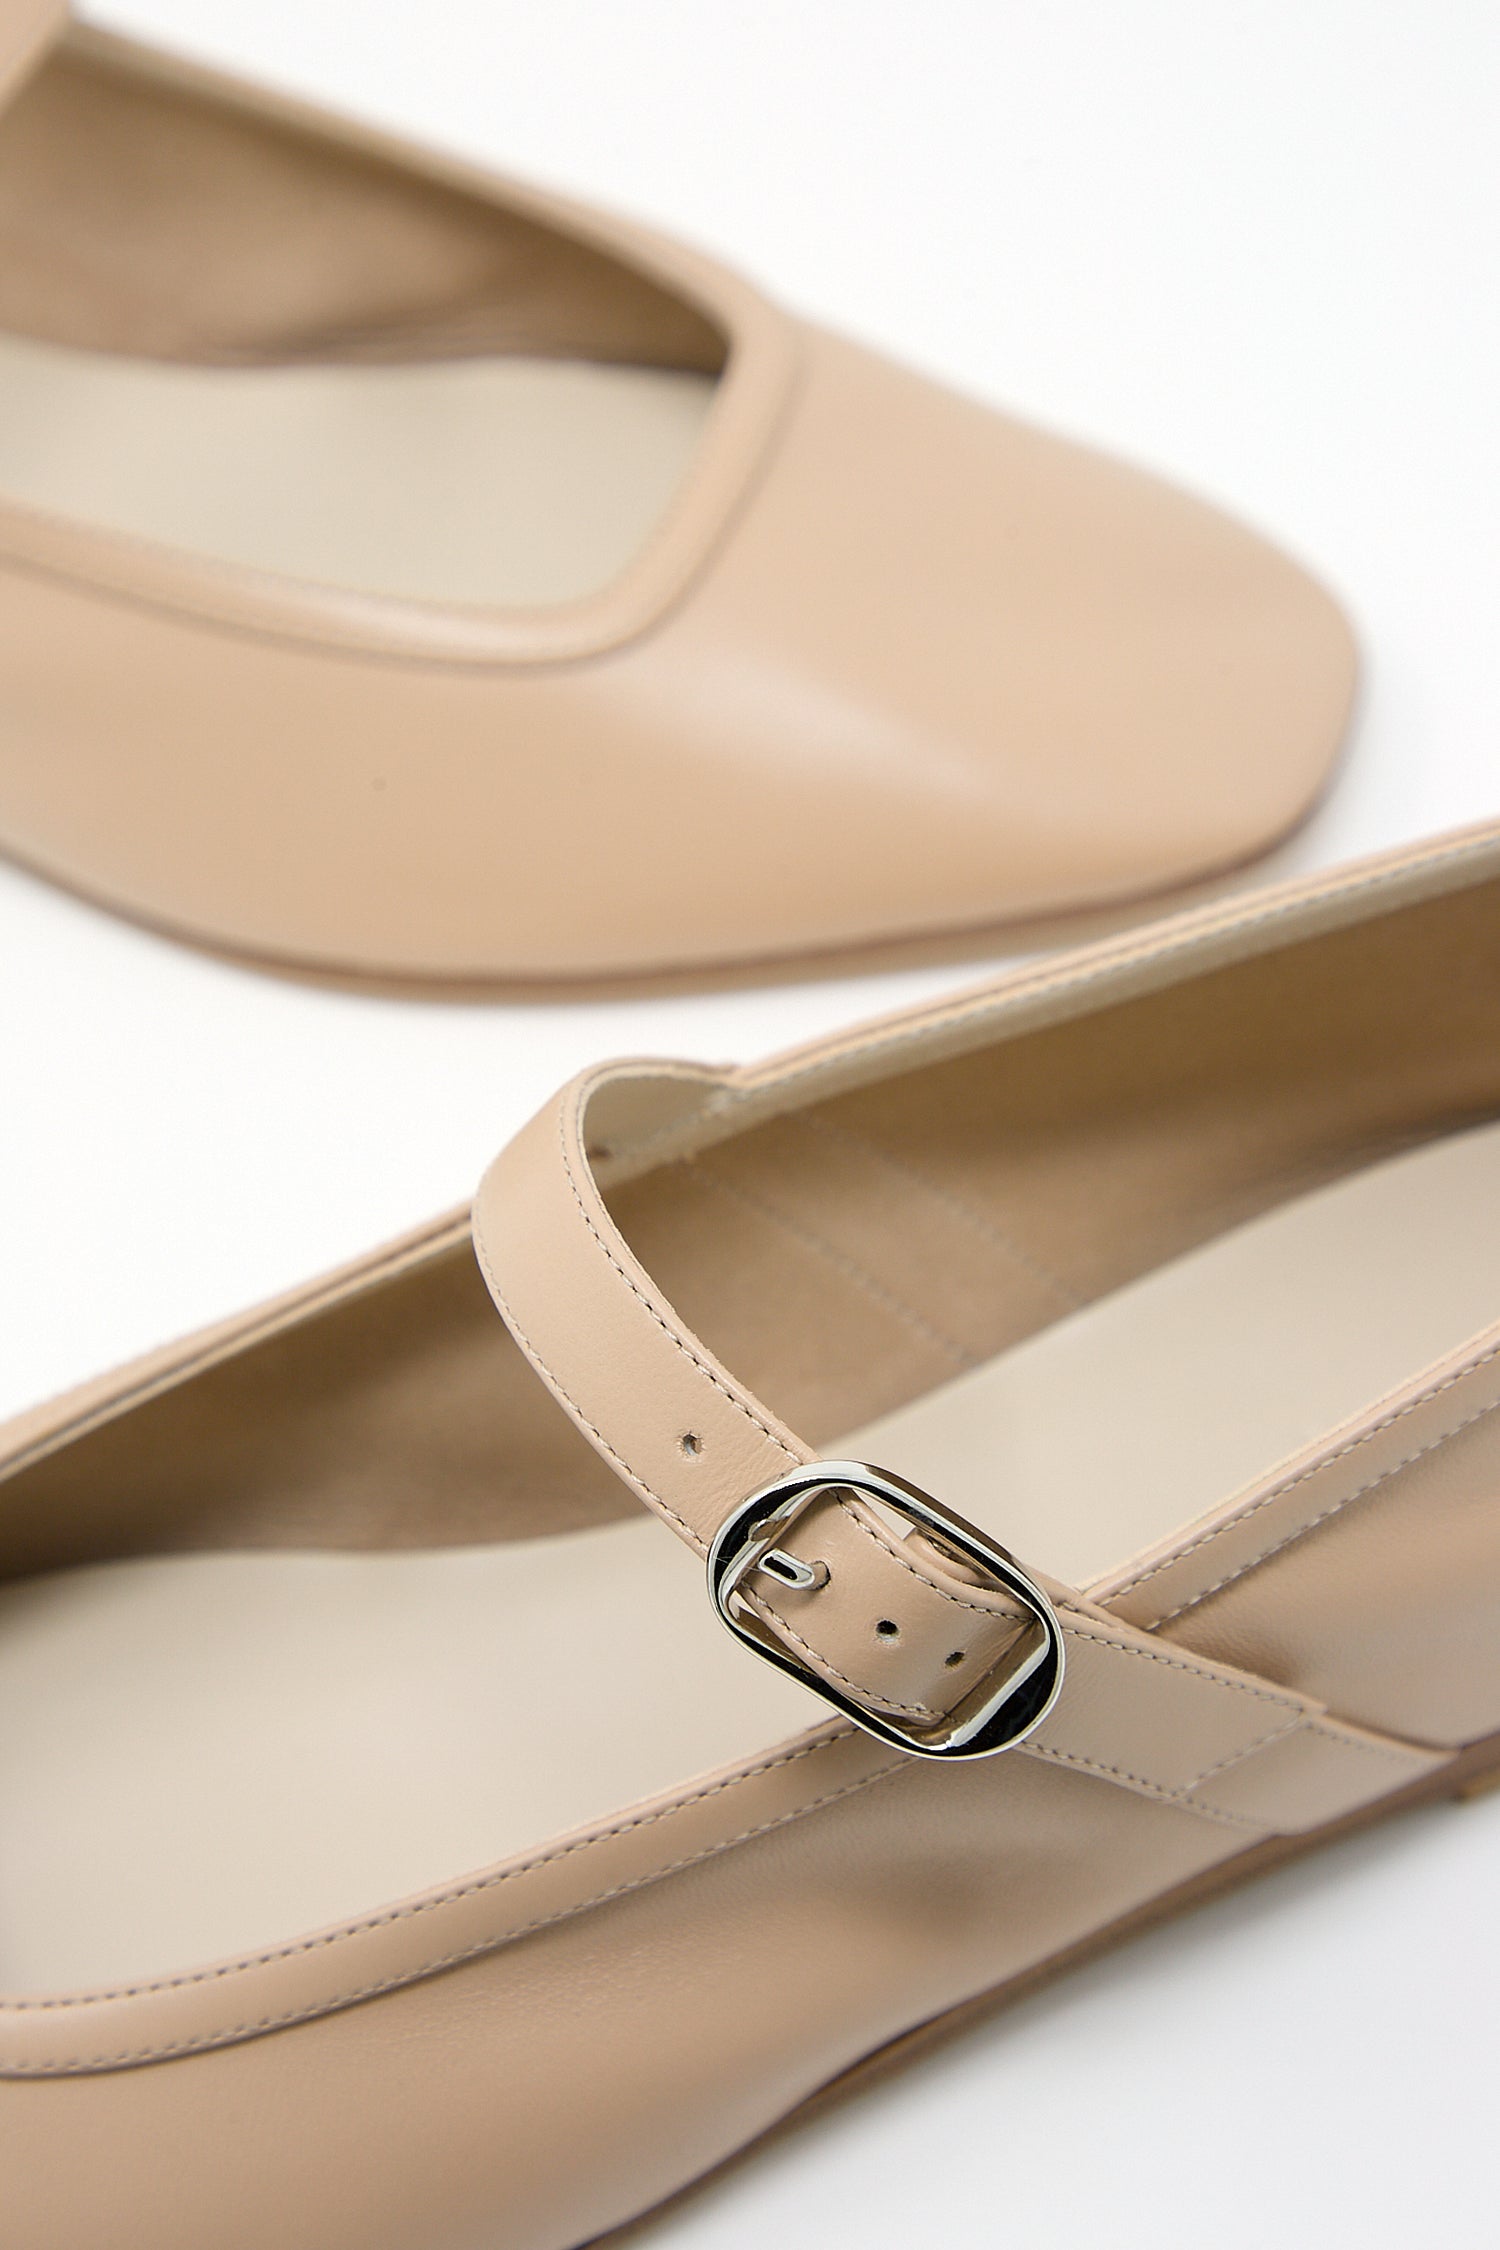 Pair of Leather Ballet Mary Jane in Fawn with leather piping and a matching belt by Le Monde Beryl.